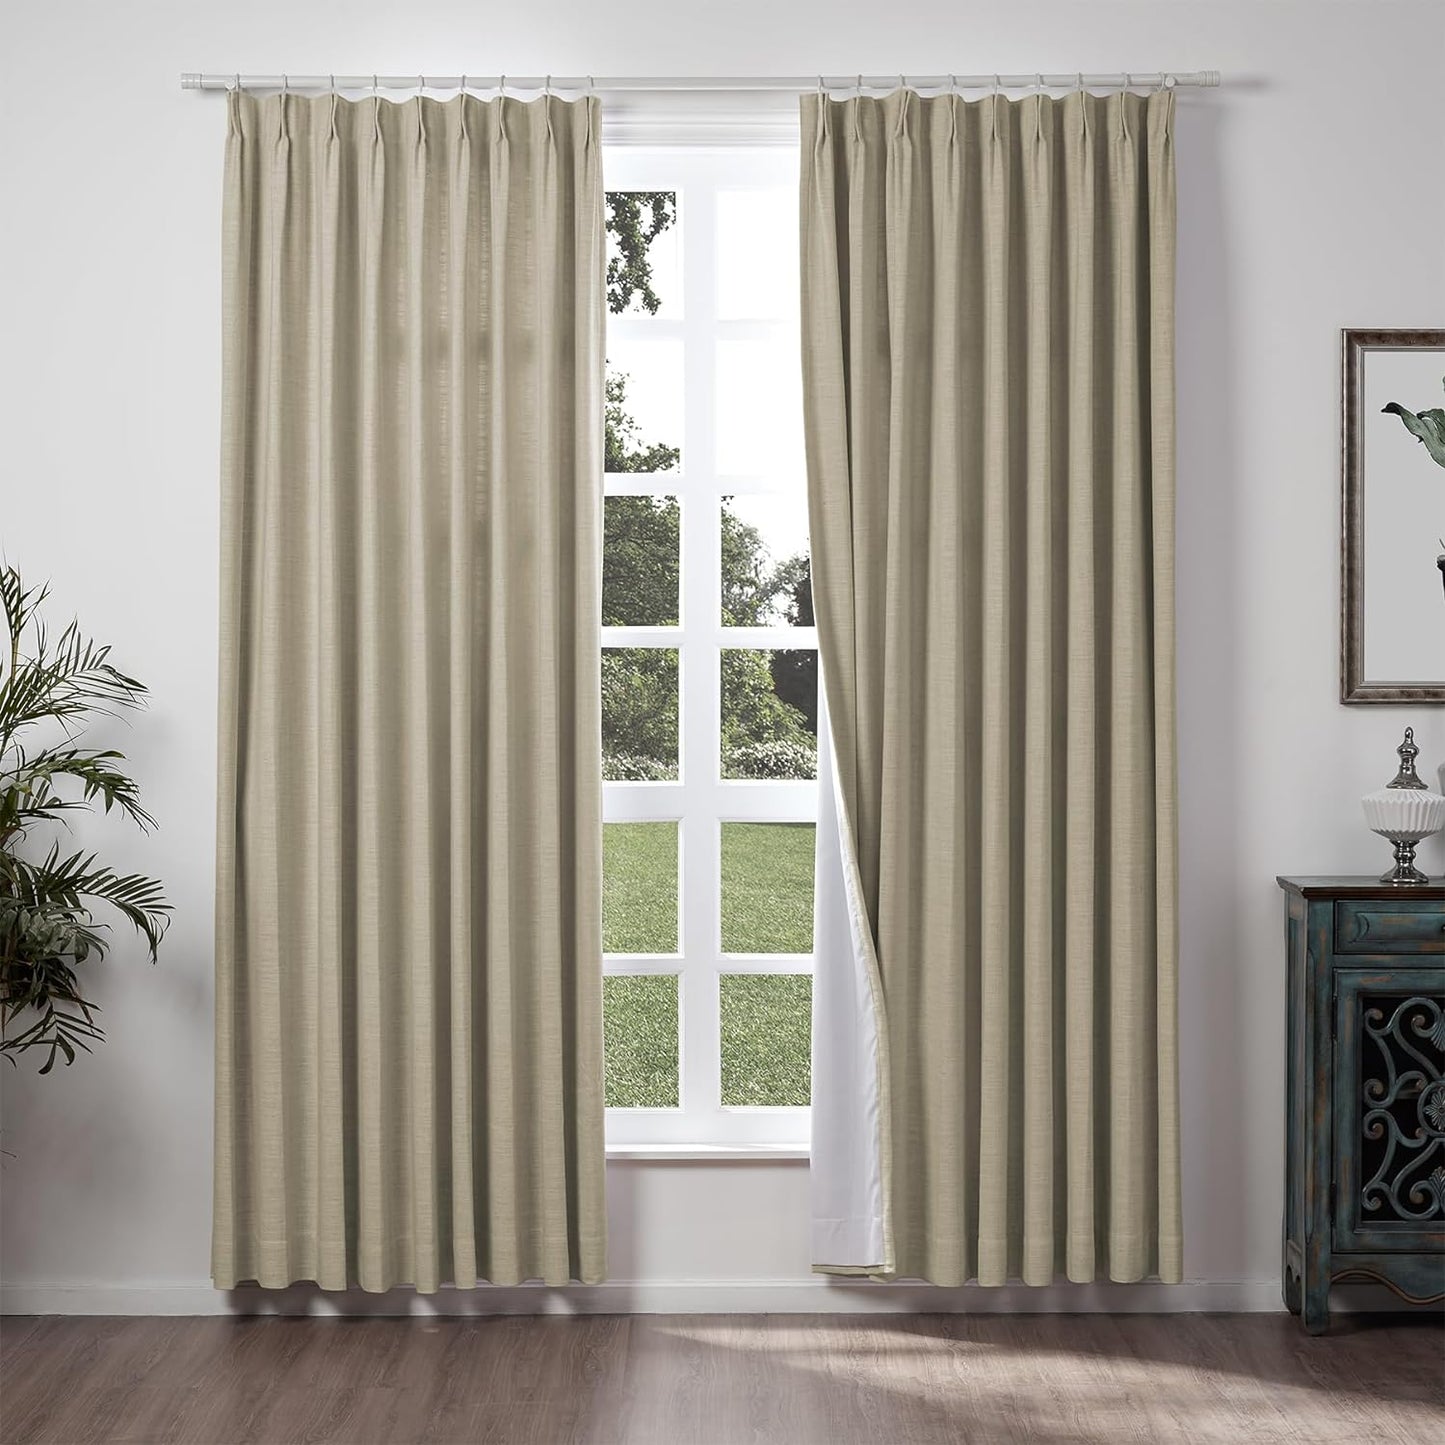 Chadmade 50" W X 63" L Polyester Linen Drape with Blackout Lining Pinch Pleat Curtain for Sliding Door Patio Door Living Room Bedroom, (1 Panel) Sand Beige Tallis Collection  ChadMade Grey Beige (6) 100Wx84L 